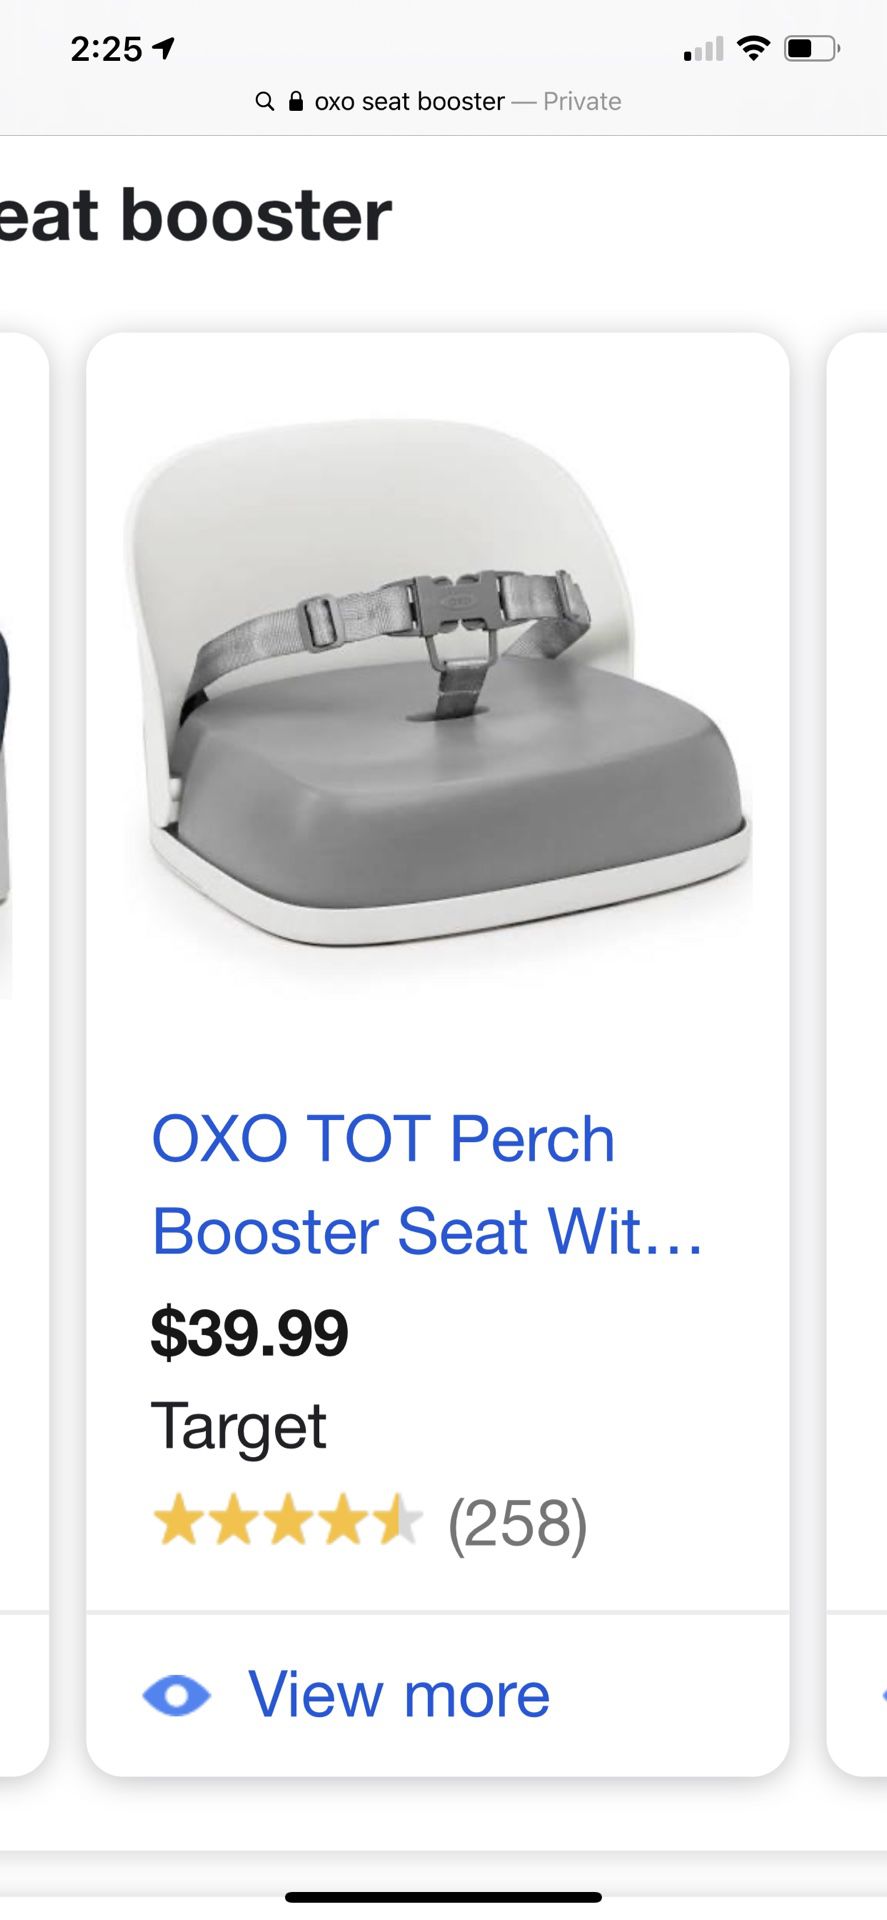 Oxo booster seat